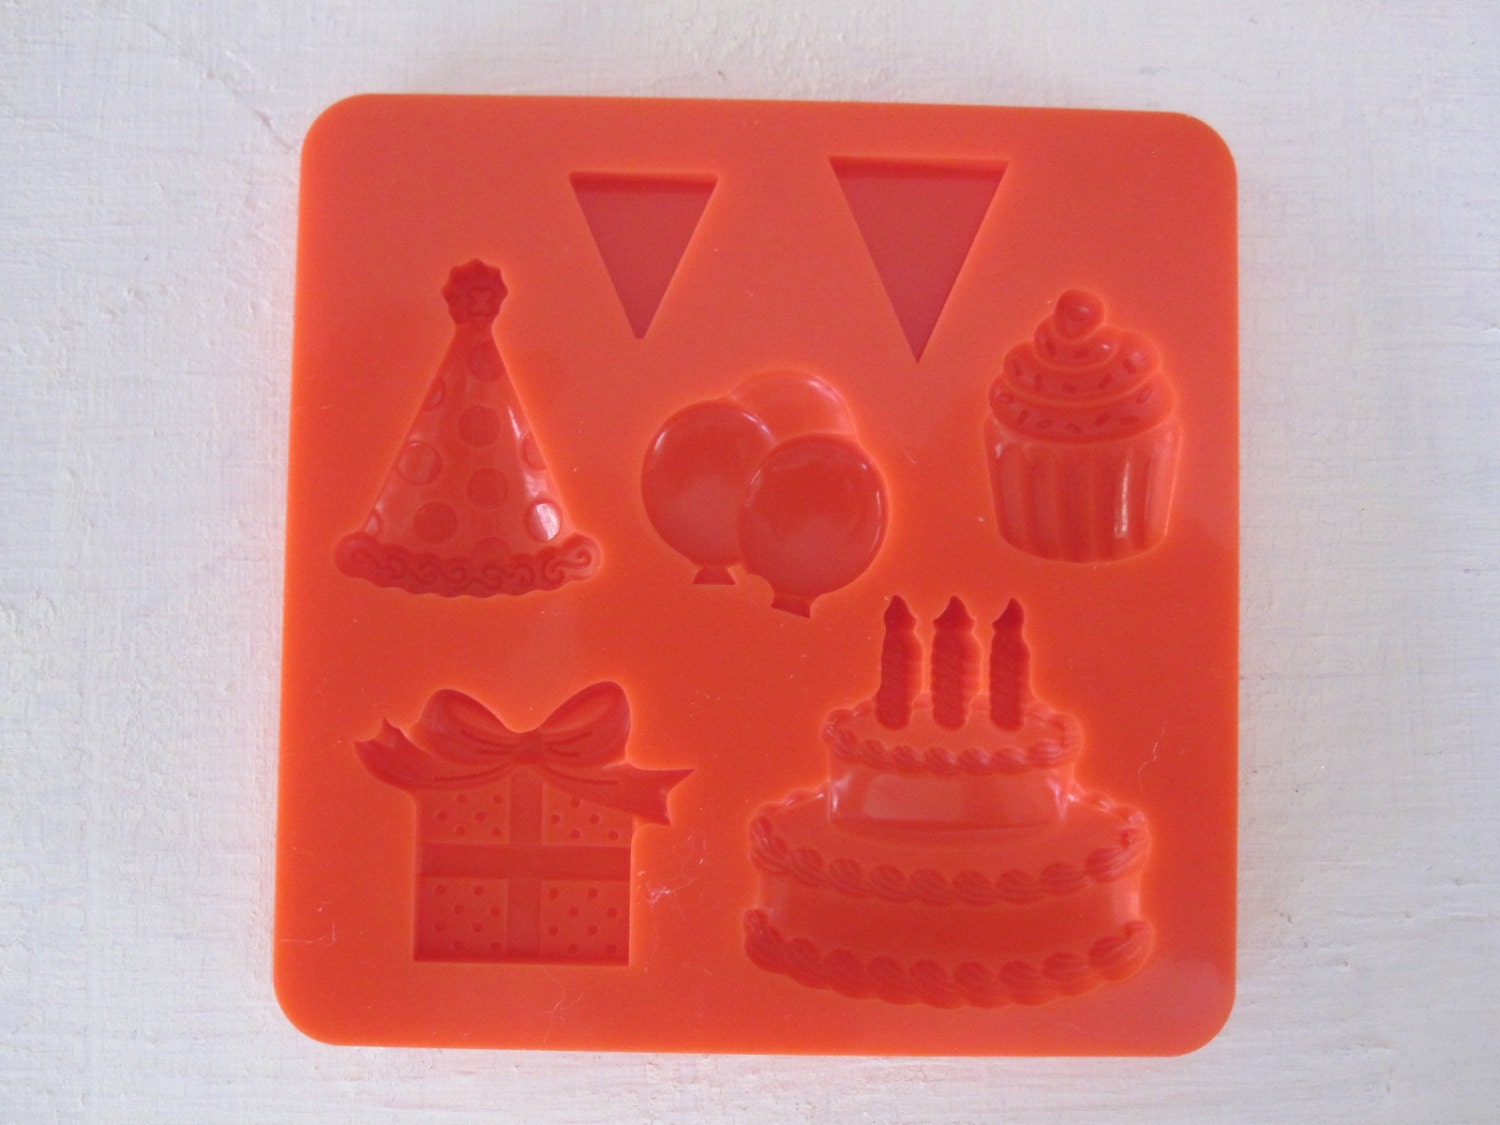 Generic UrijkMuffin Moulds Silicone Mold Bakeware Cupcake Liner